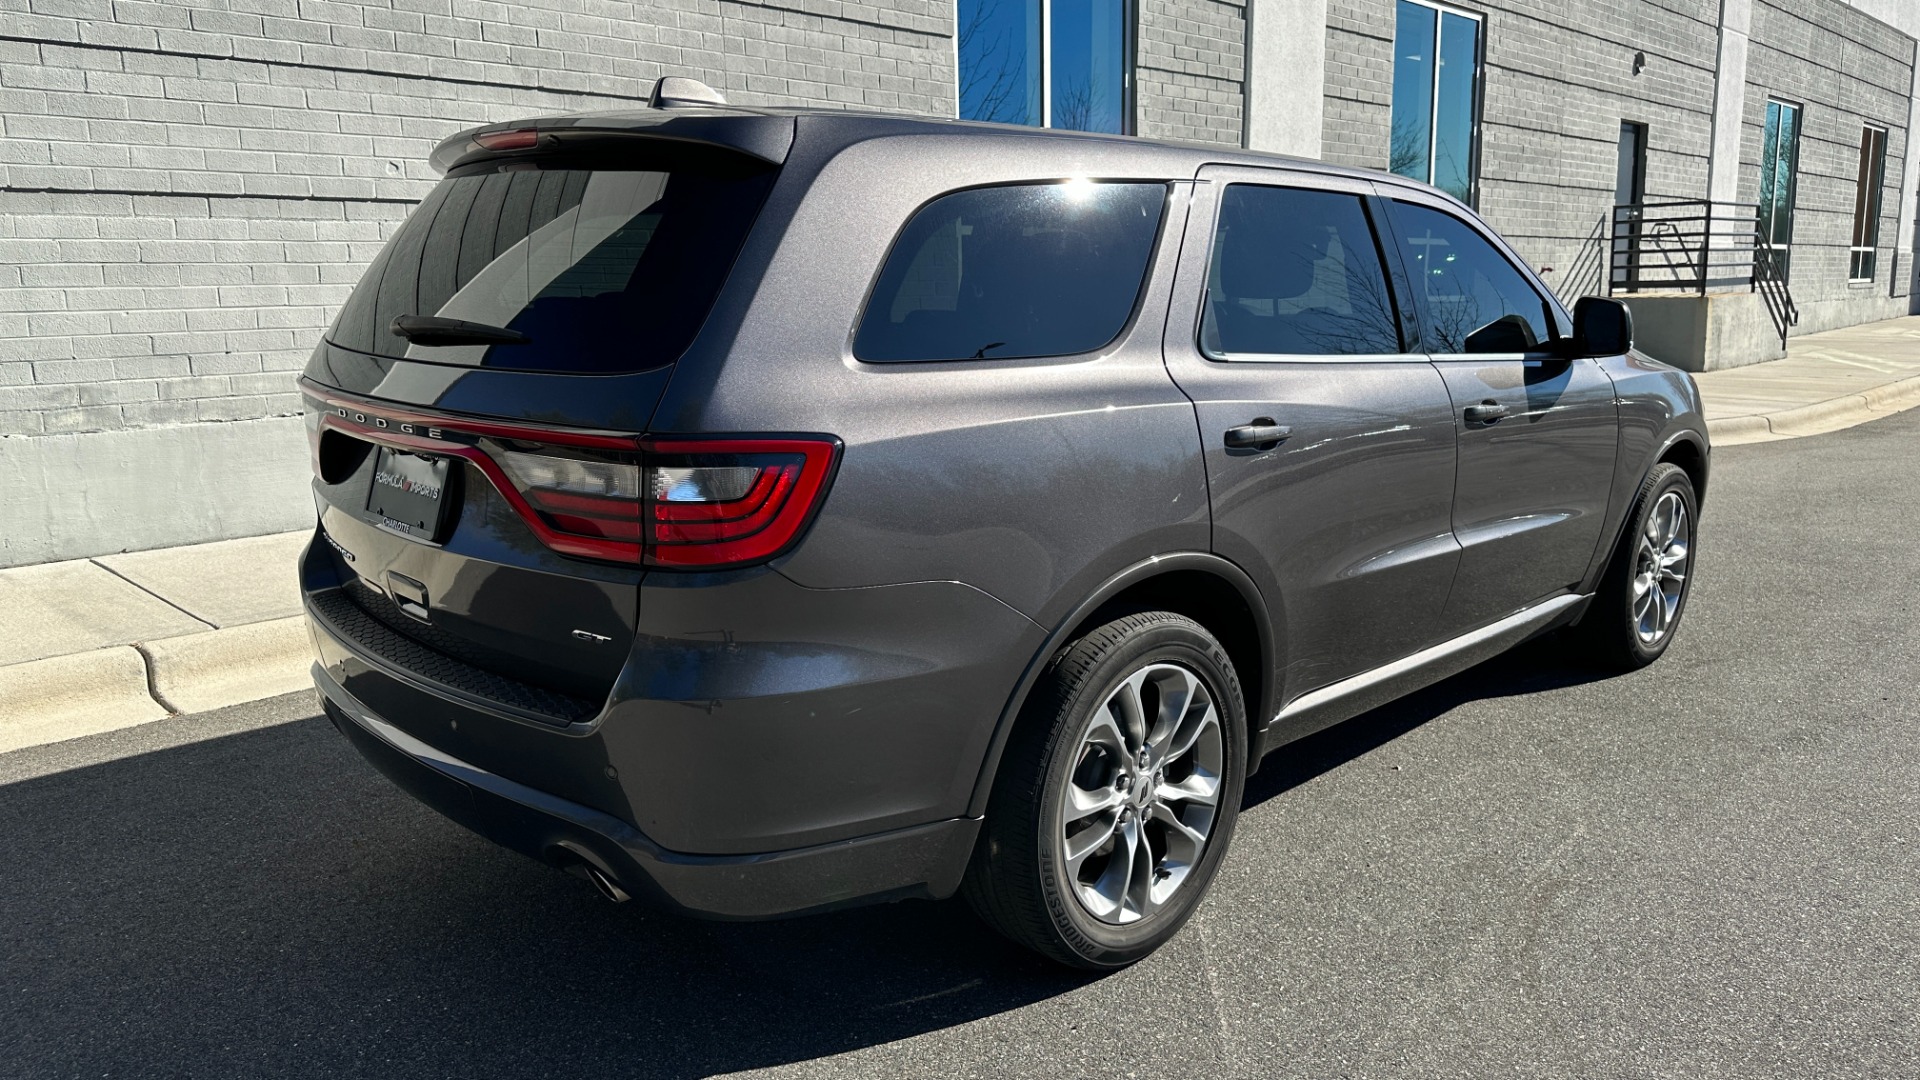 Used 2020 Dodge Durango GT PLUS / HEATED SEATS / SUEDE LEATHER / 3 ROW SEATING / REMOTE START for sale $27,995 at Formula Imports in Charlotte NC 28227 4